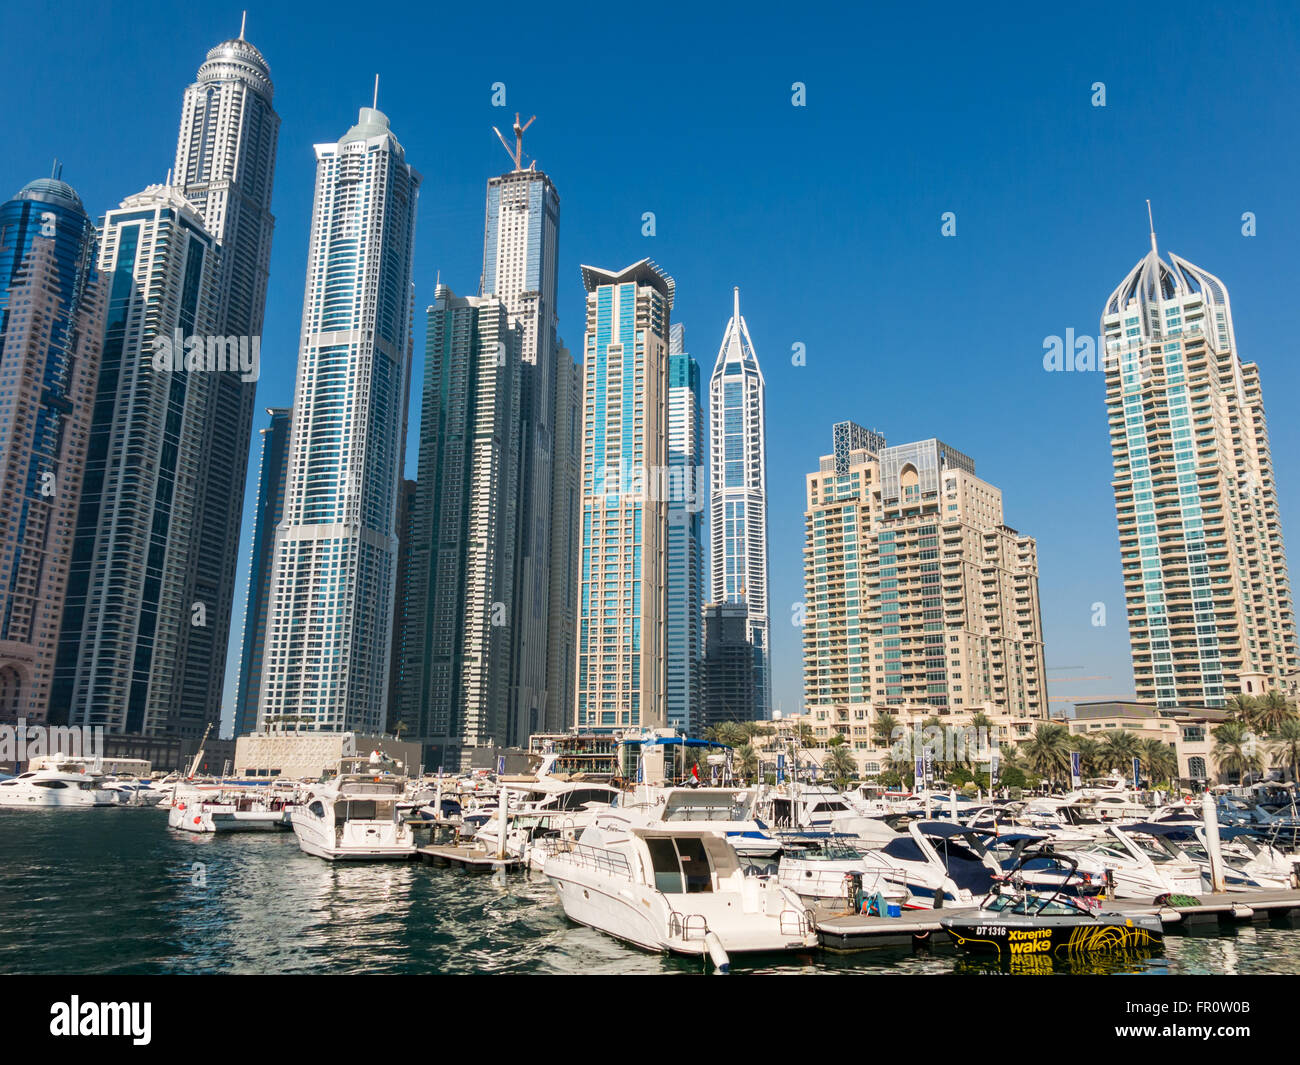 Motor yachts and highrise waterfront buildings in the Marina district of Dubai, United Arab Emirates Stock Photo